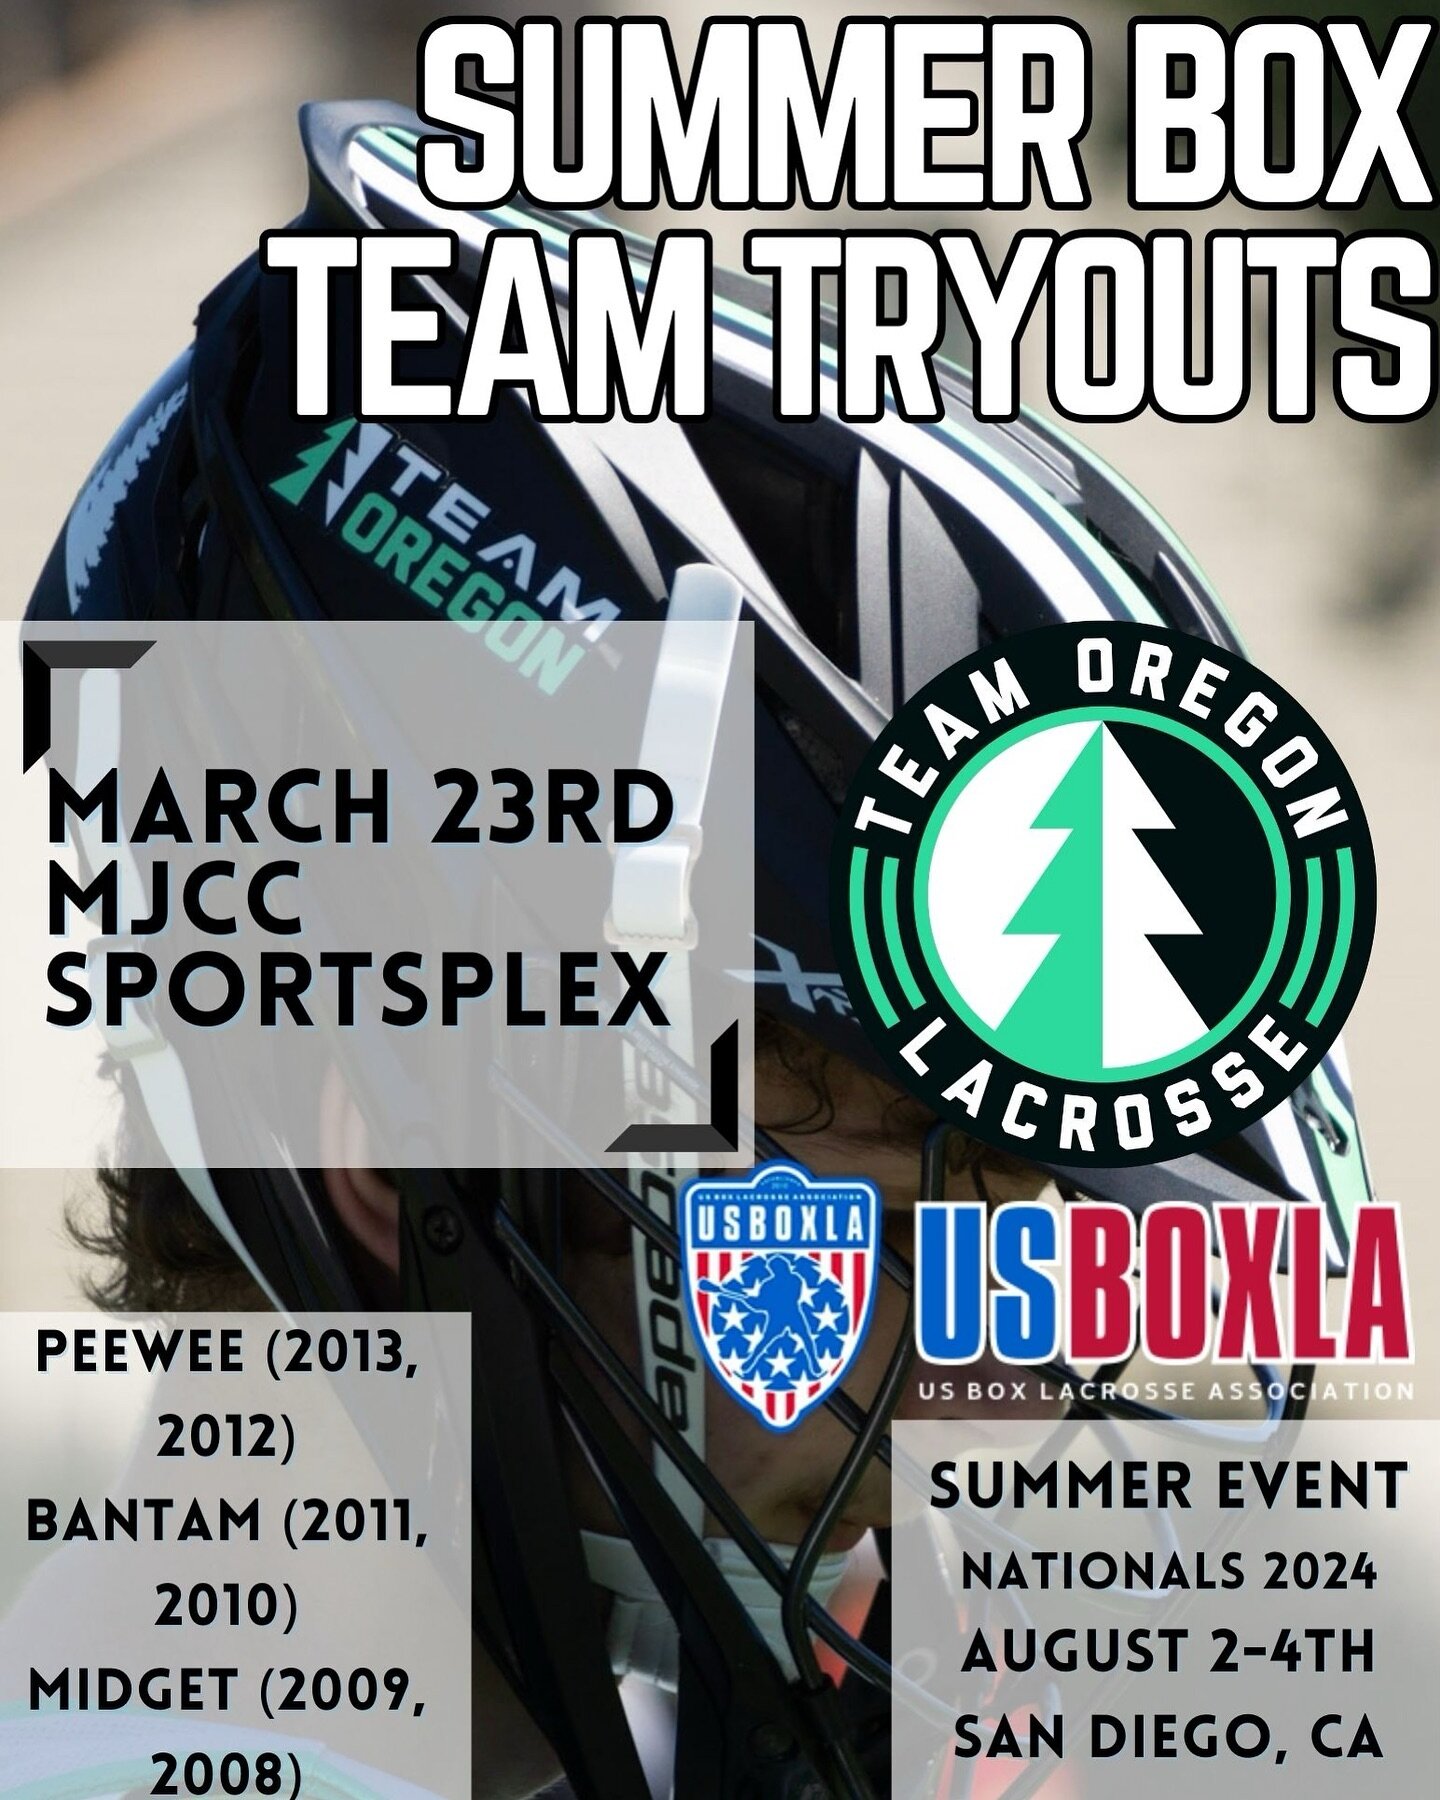 Join us for box tryouts to compete at the USBOXLA Nationals! This is an awesome way to increase your lacrosse skill set! We will have 3 teams led by an amazing coaching staff with former NLL Pro @devanspilker overseeing! 

#teamoregonlacrosse #signup